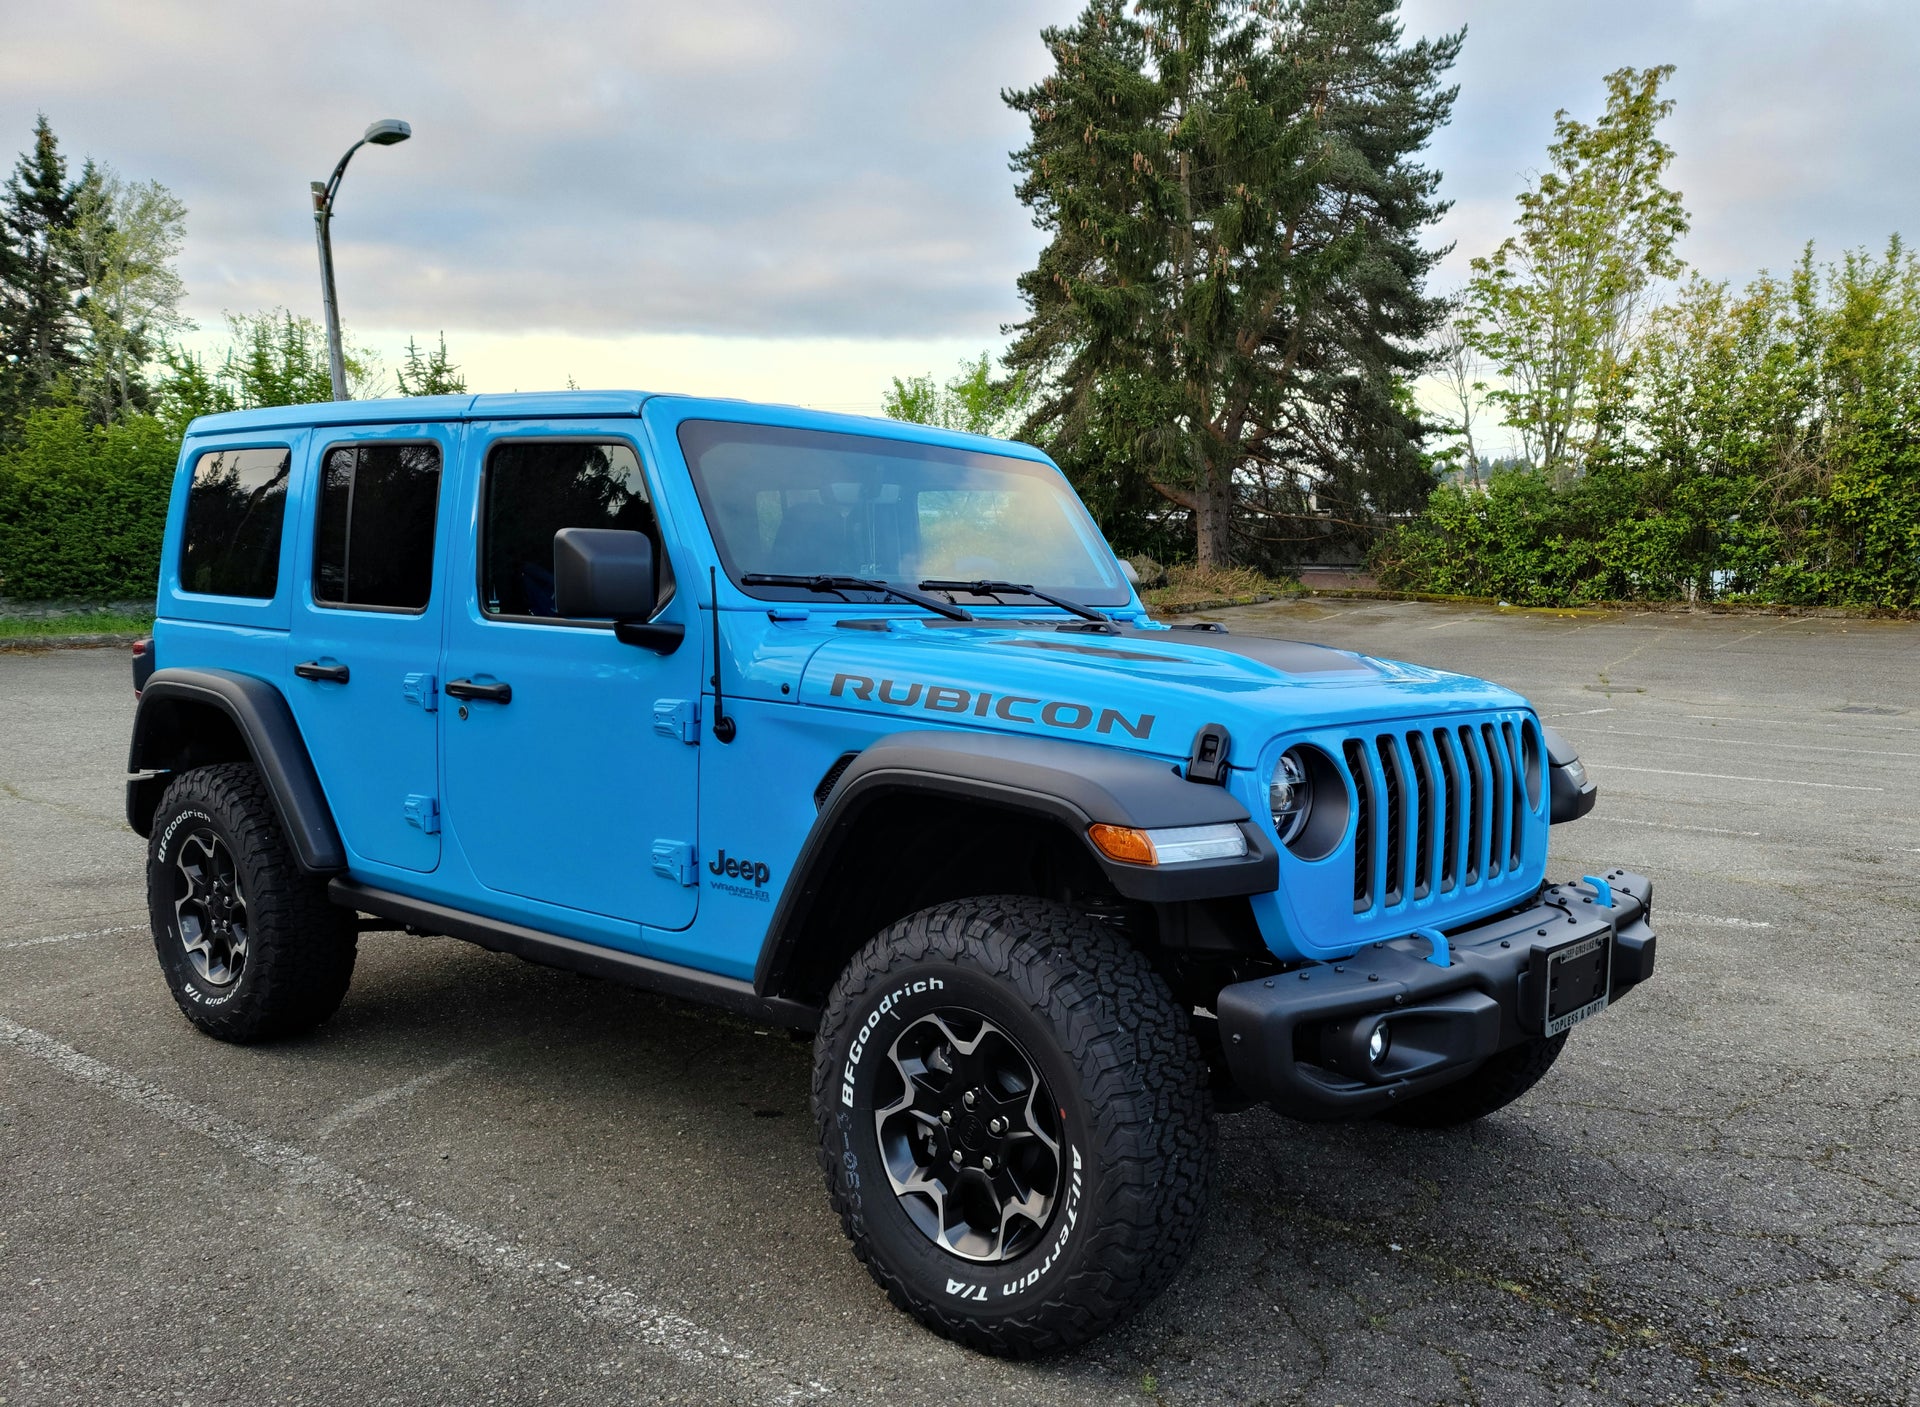 Chief Jeep Wrangler 4xe Owners Picture Thread | Jeep Wrangler 4xe Forum